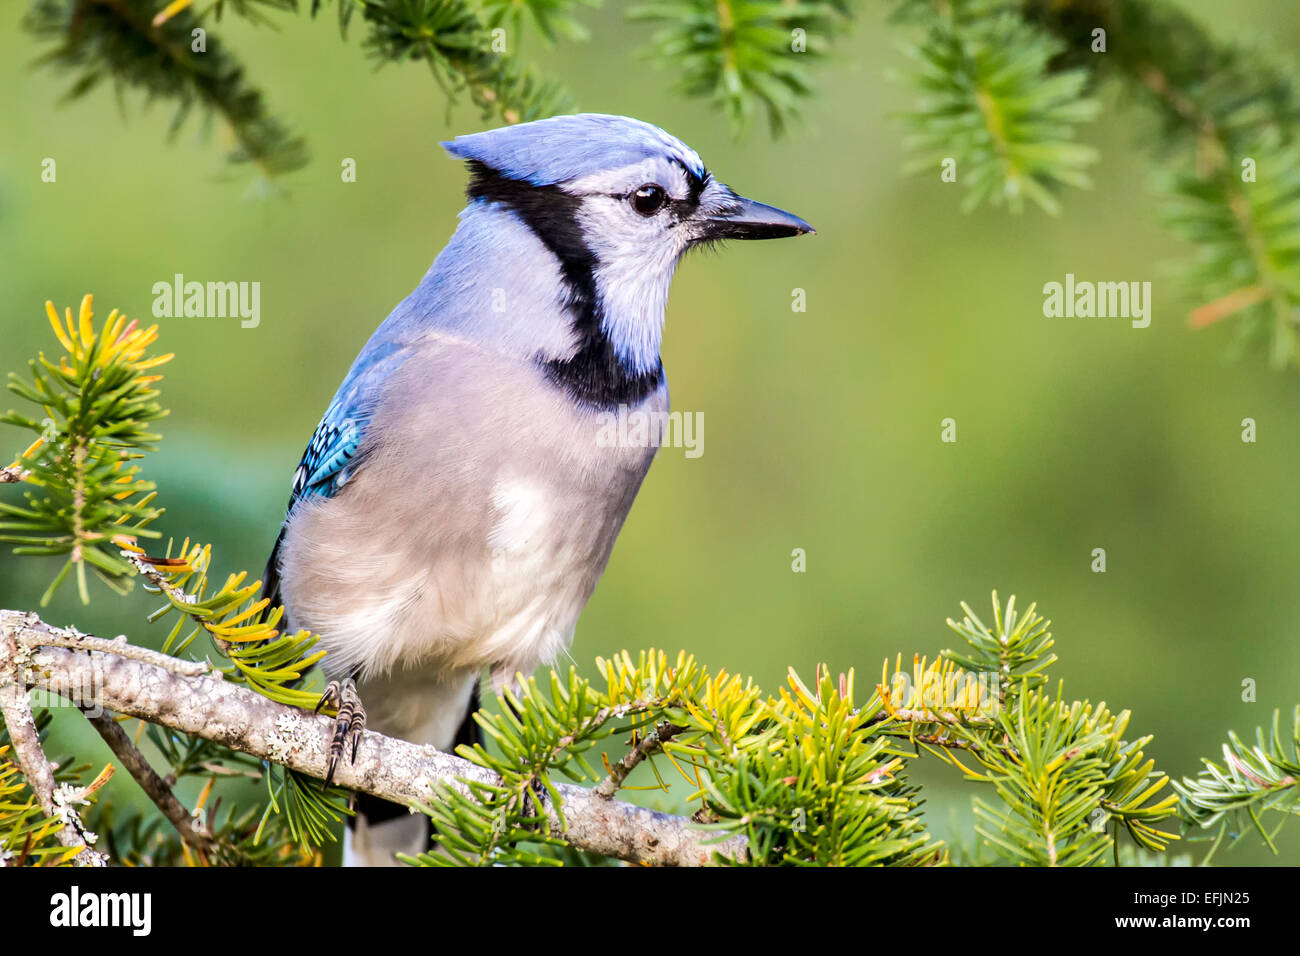 Bluejay perched in tree Stock Photo